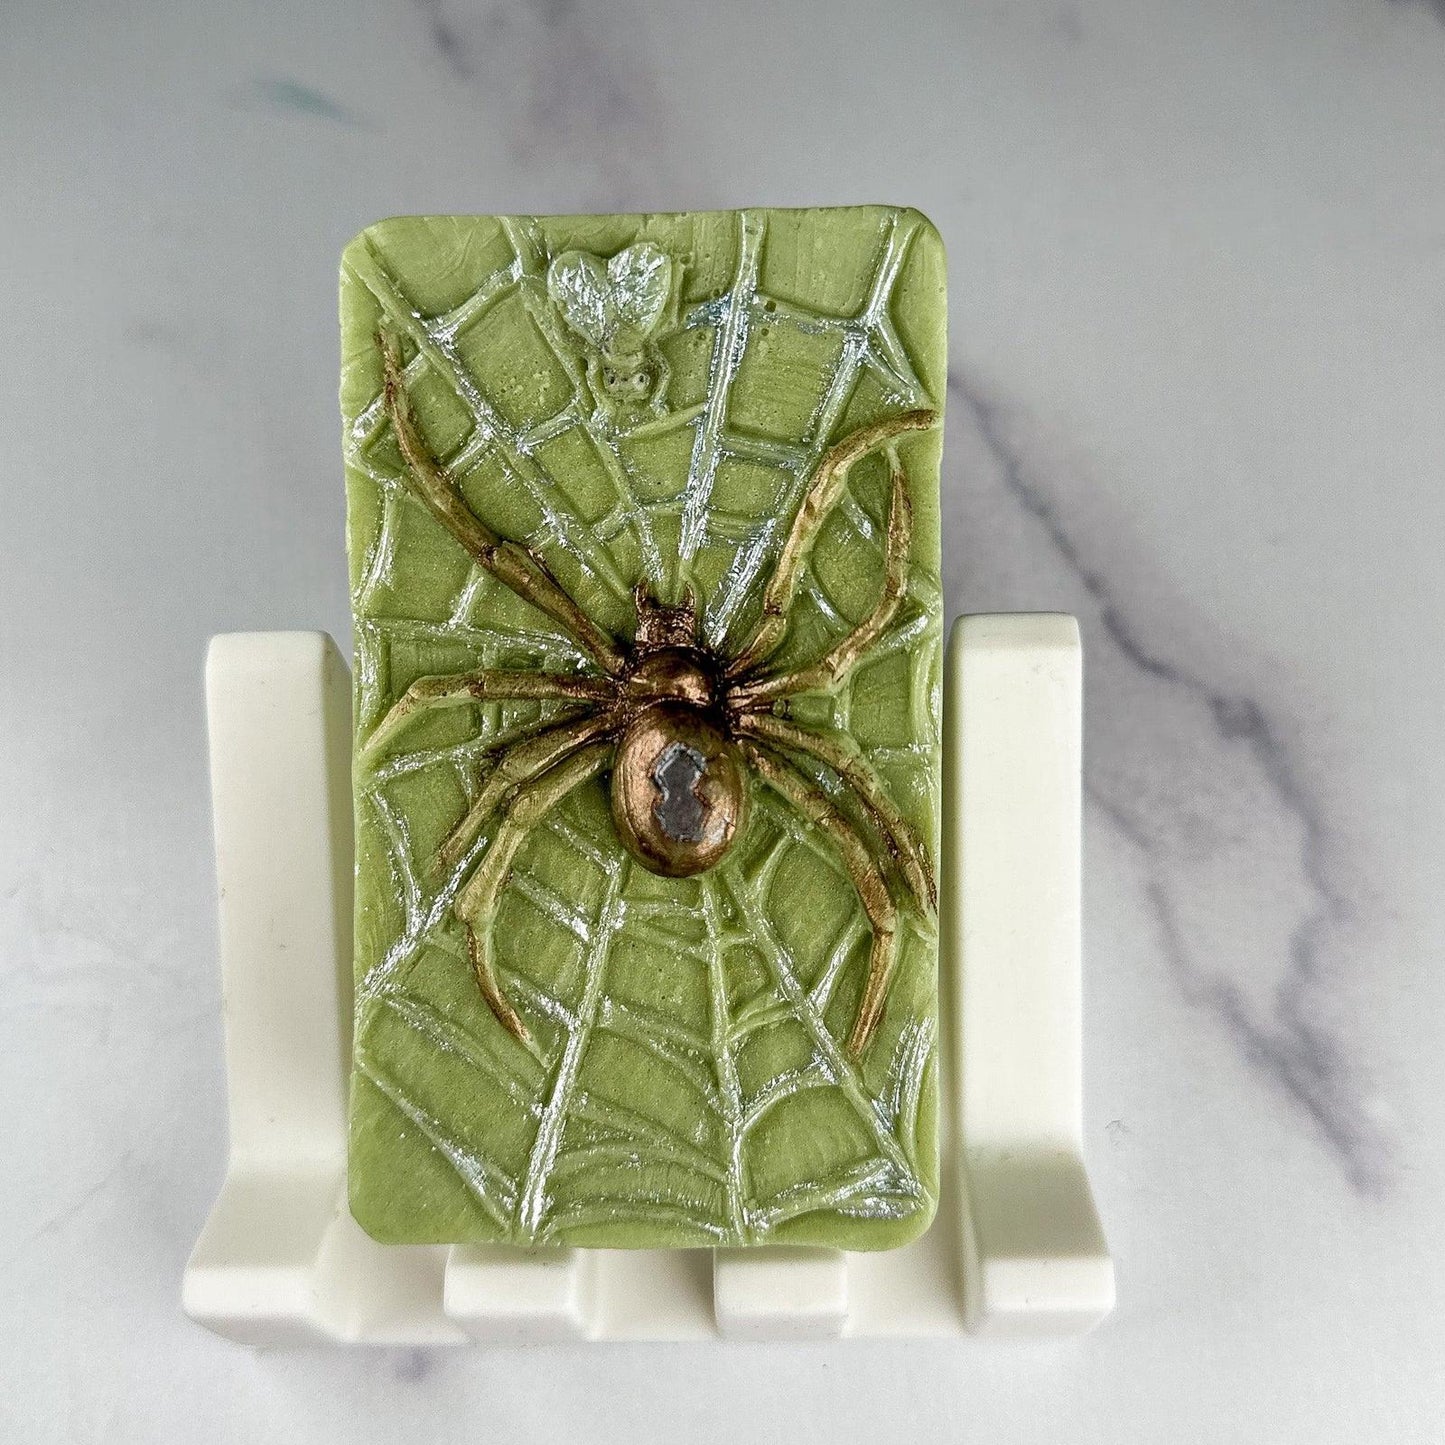 Painted Soap - Eucalyptus and Cotton - The Serpentry